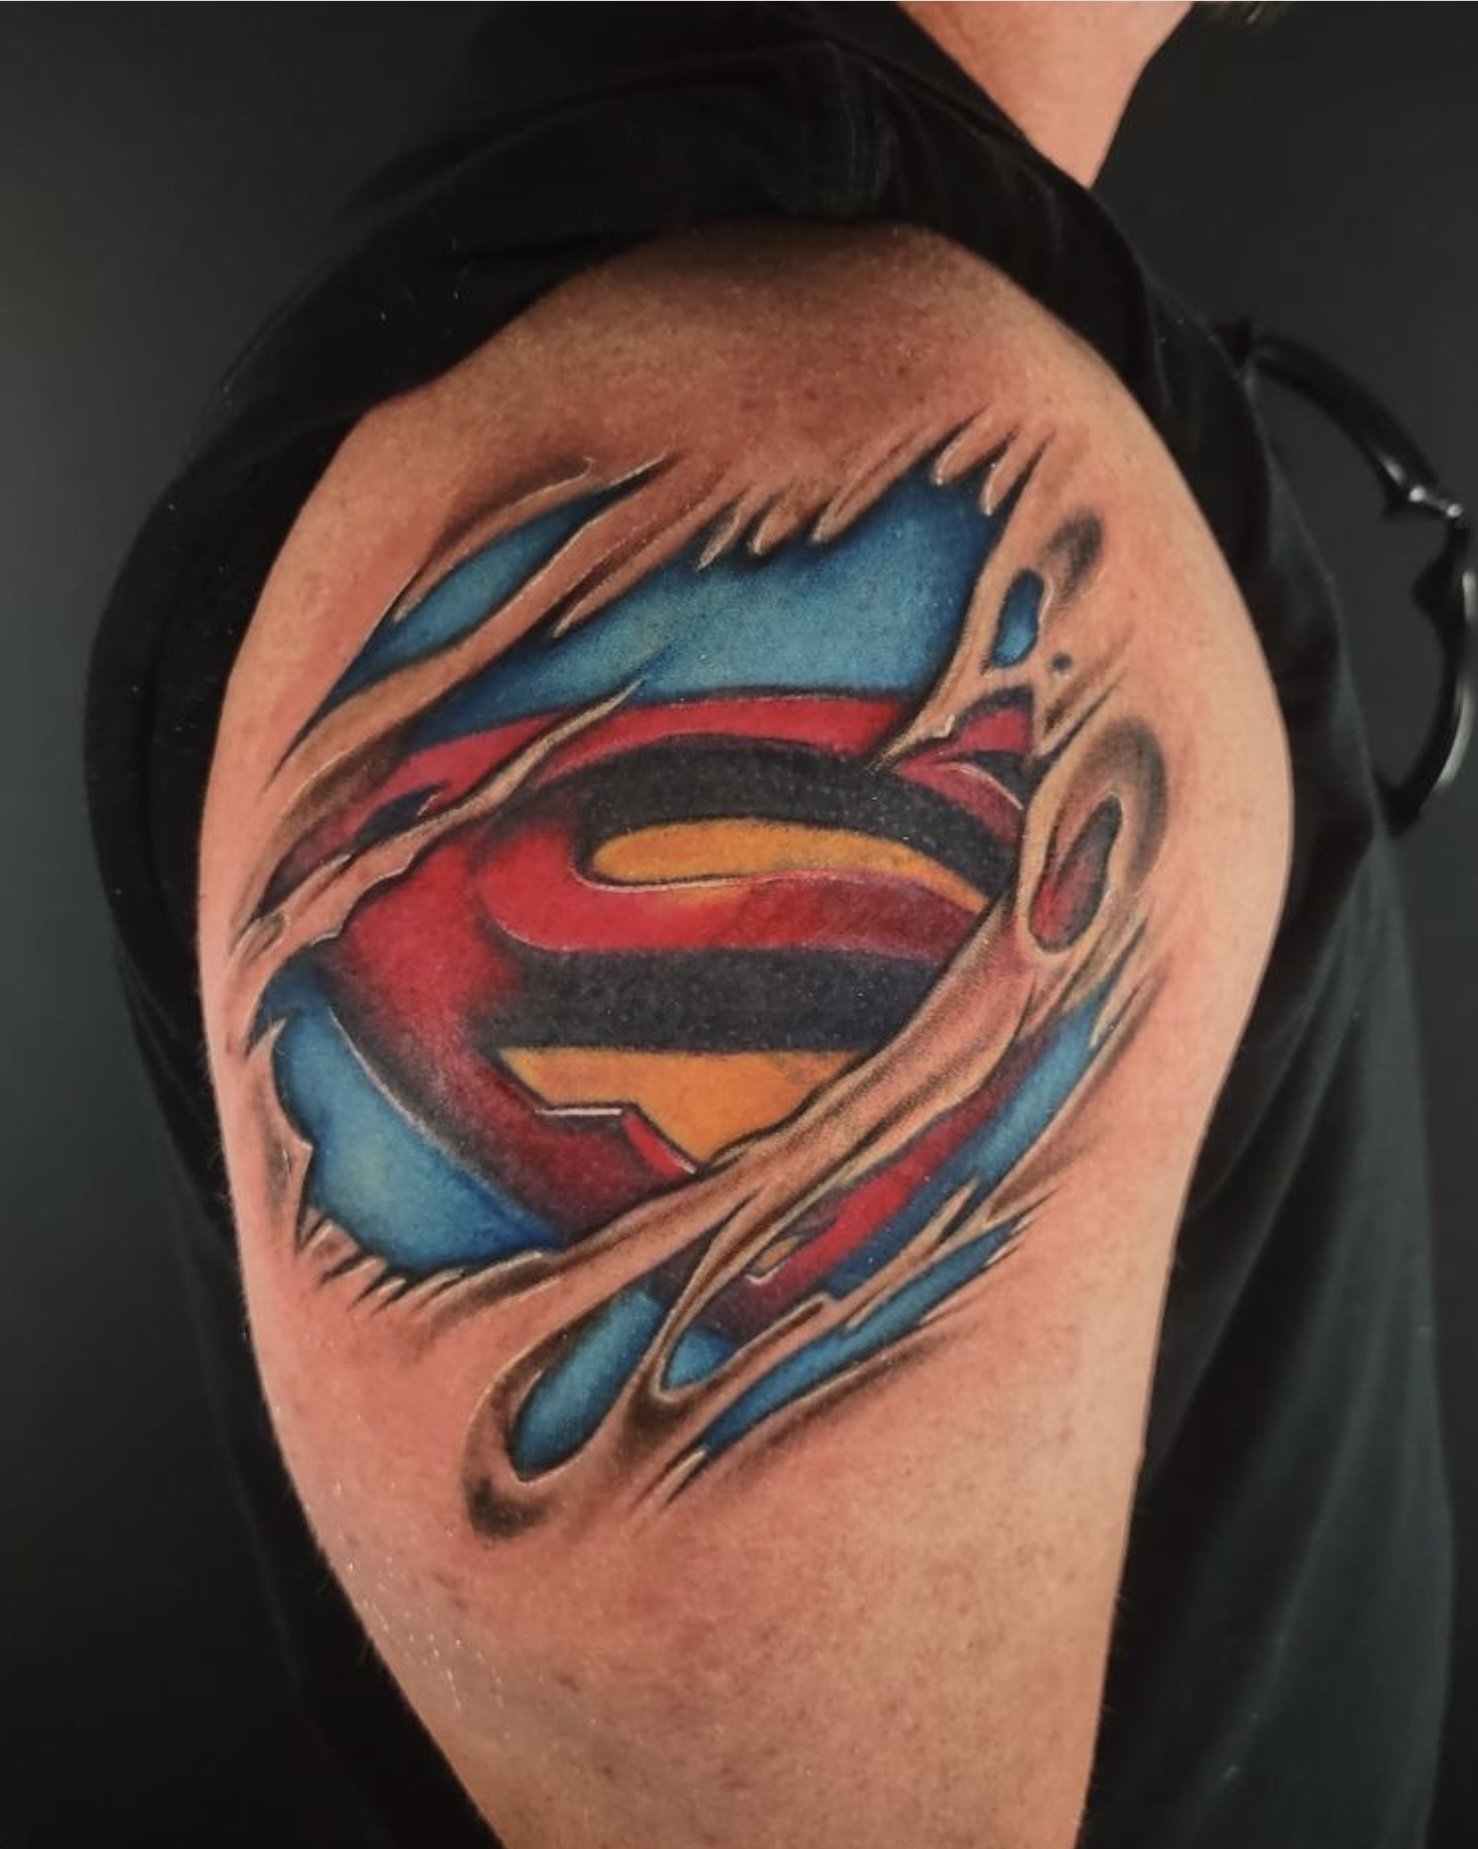 Color Realism Tattoo: Tips, Techniques, and Best Practices — Certified Tattoo Studios